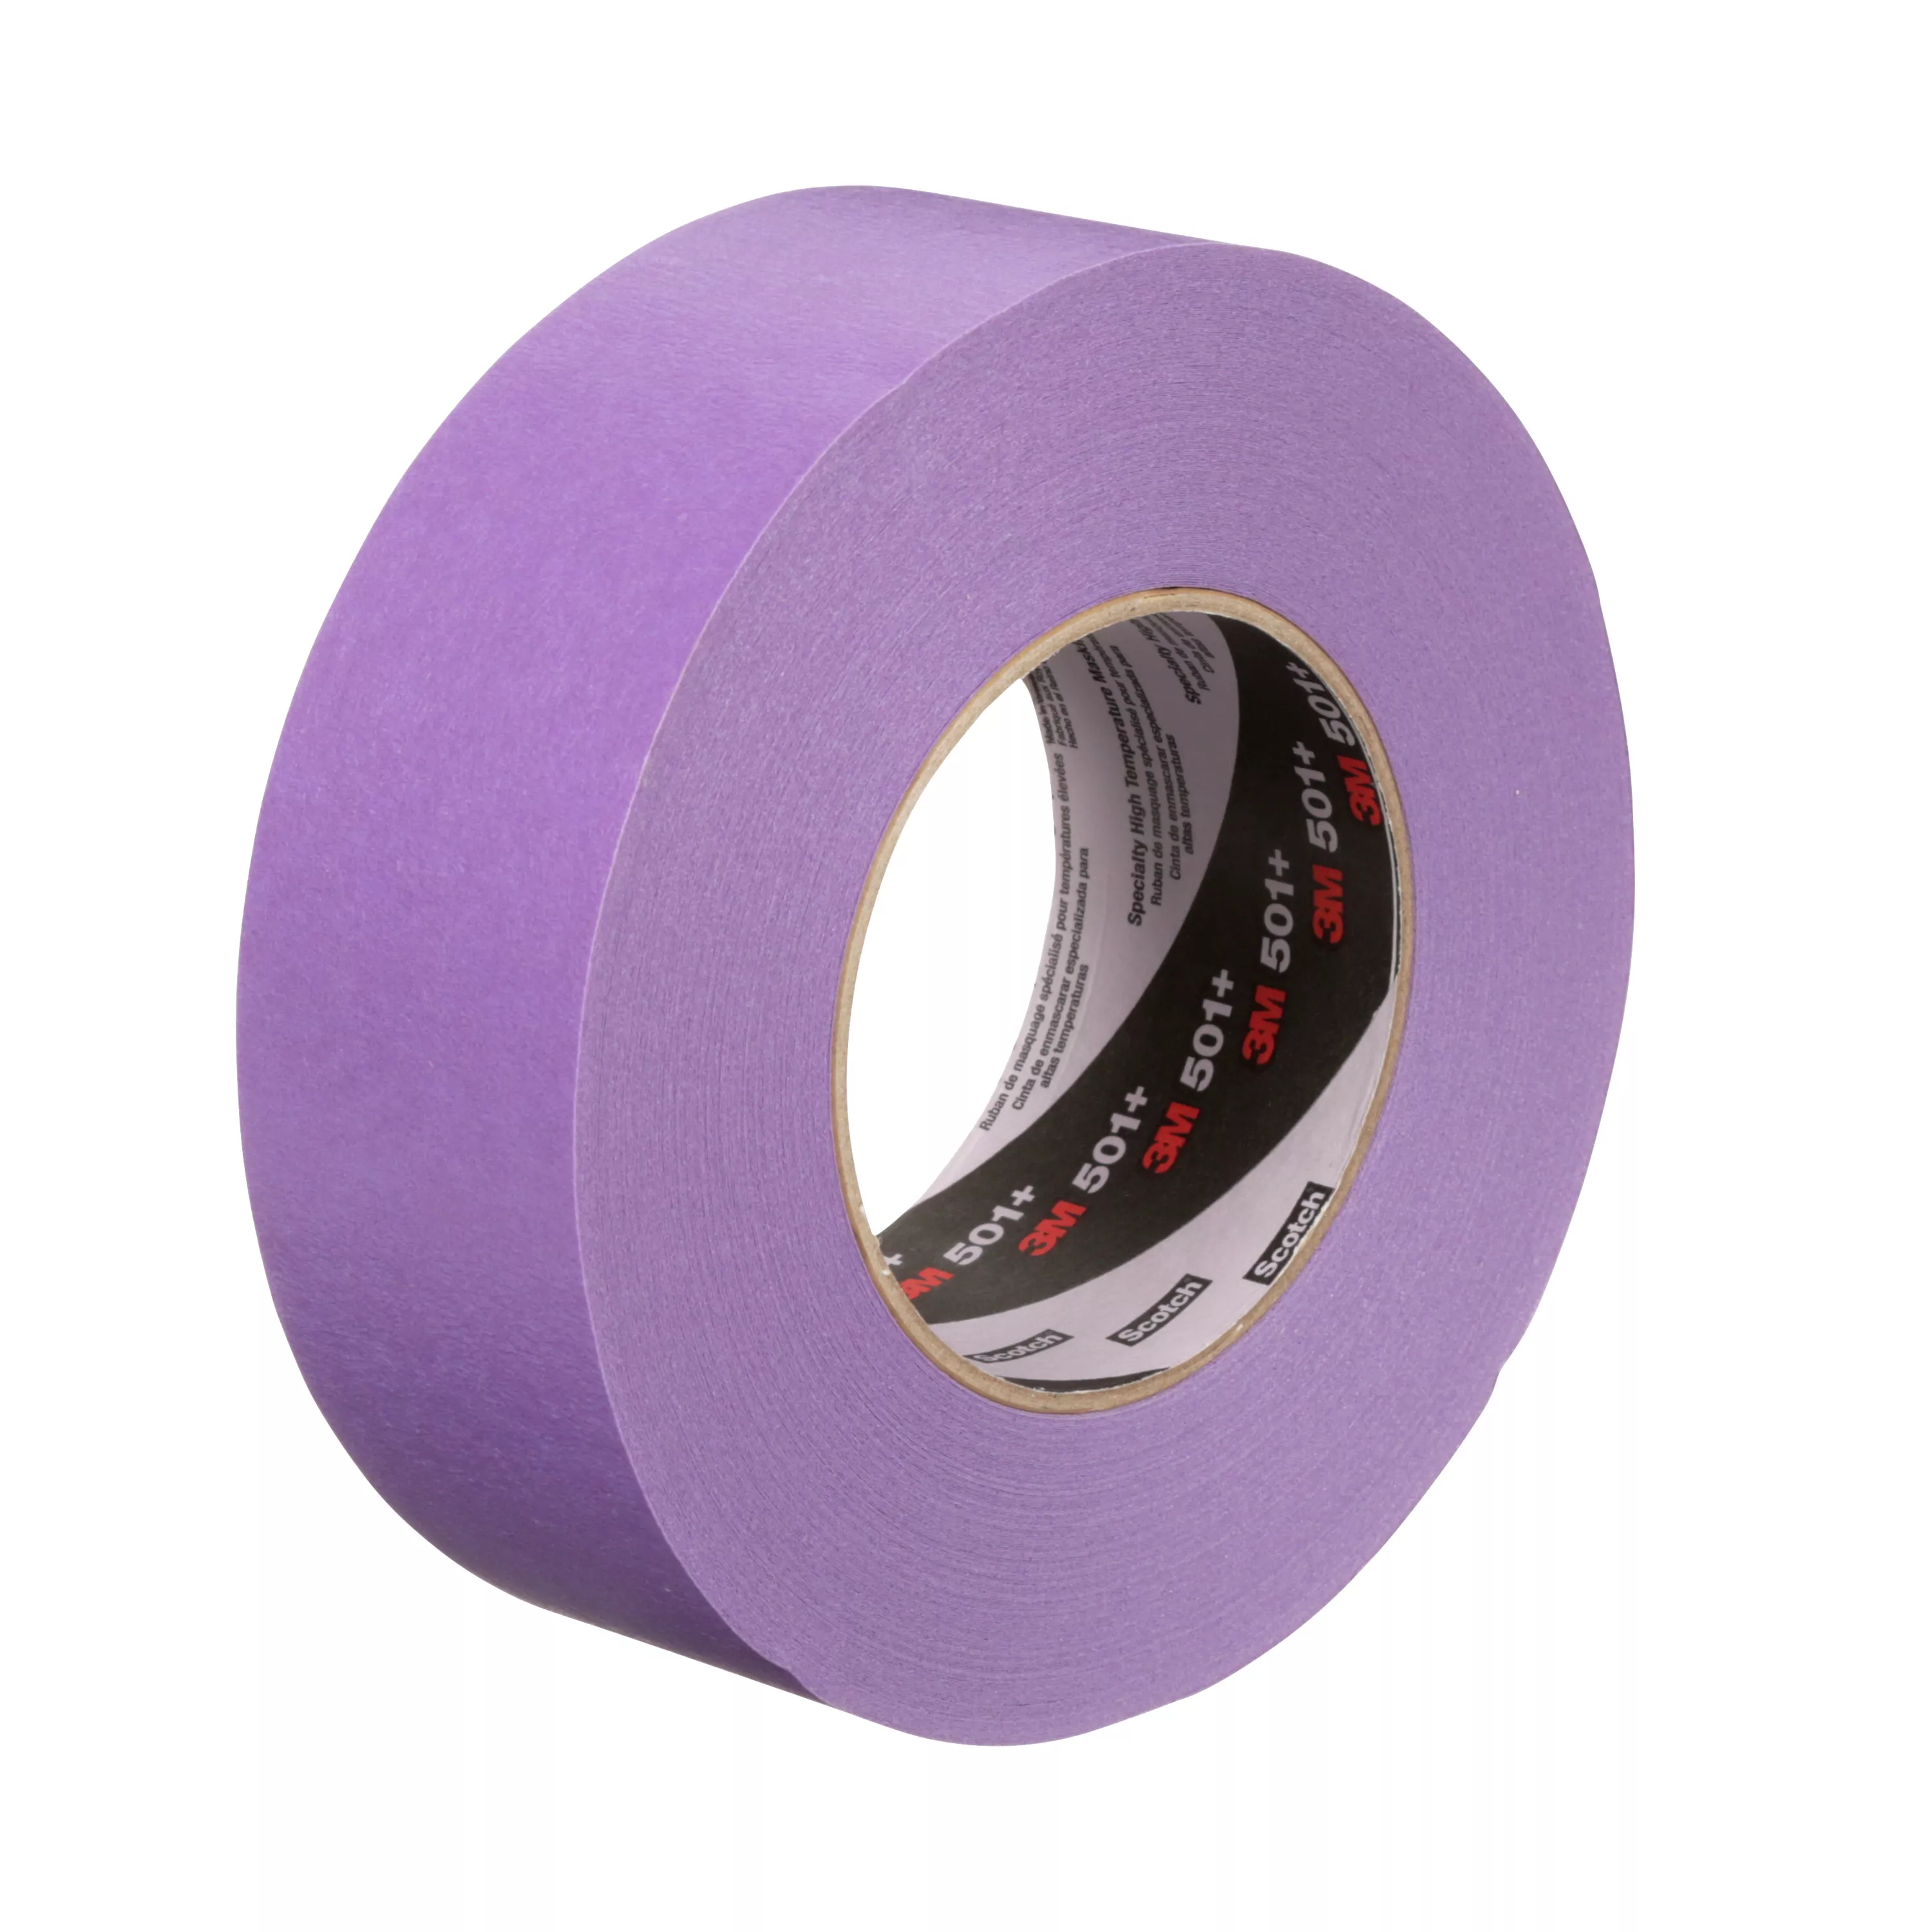 SKU 7100086765 | 3M™ Specialty High Temperature Masking Tape 501+